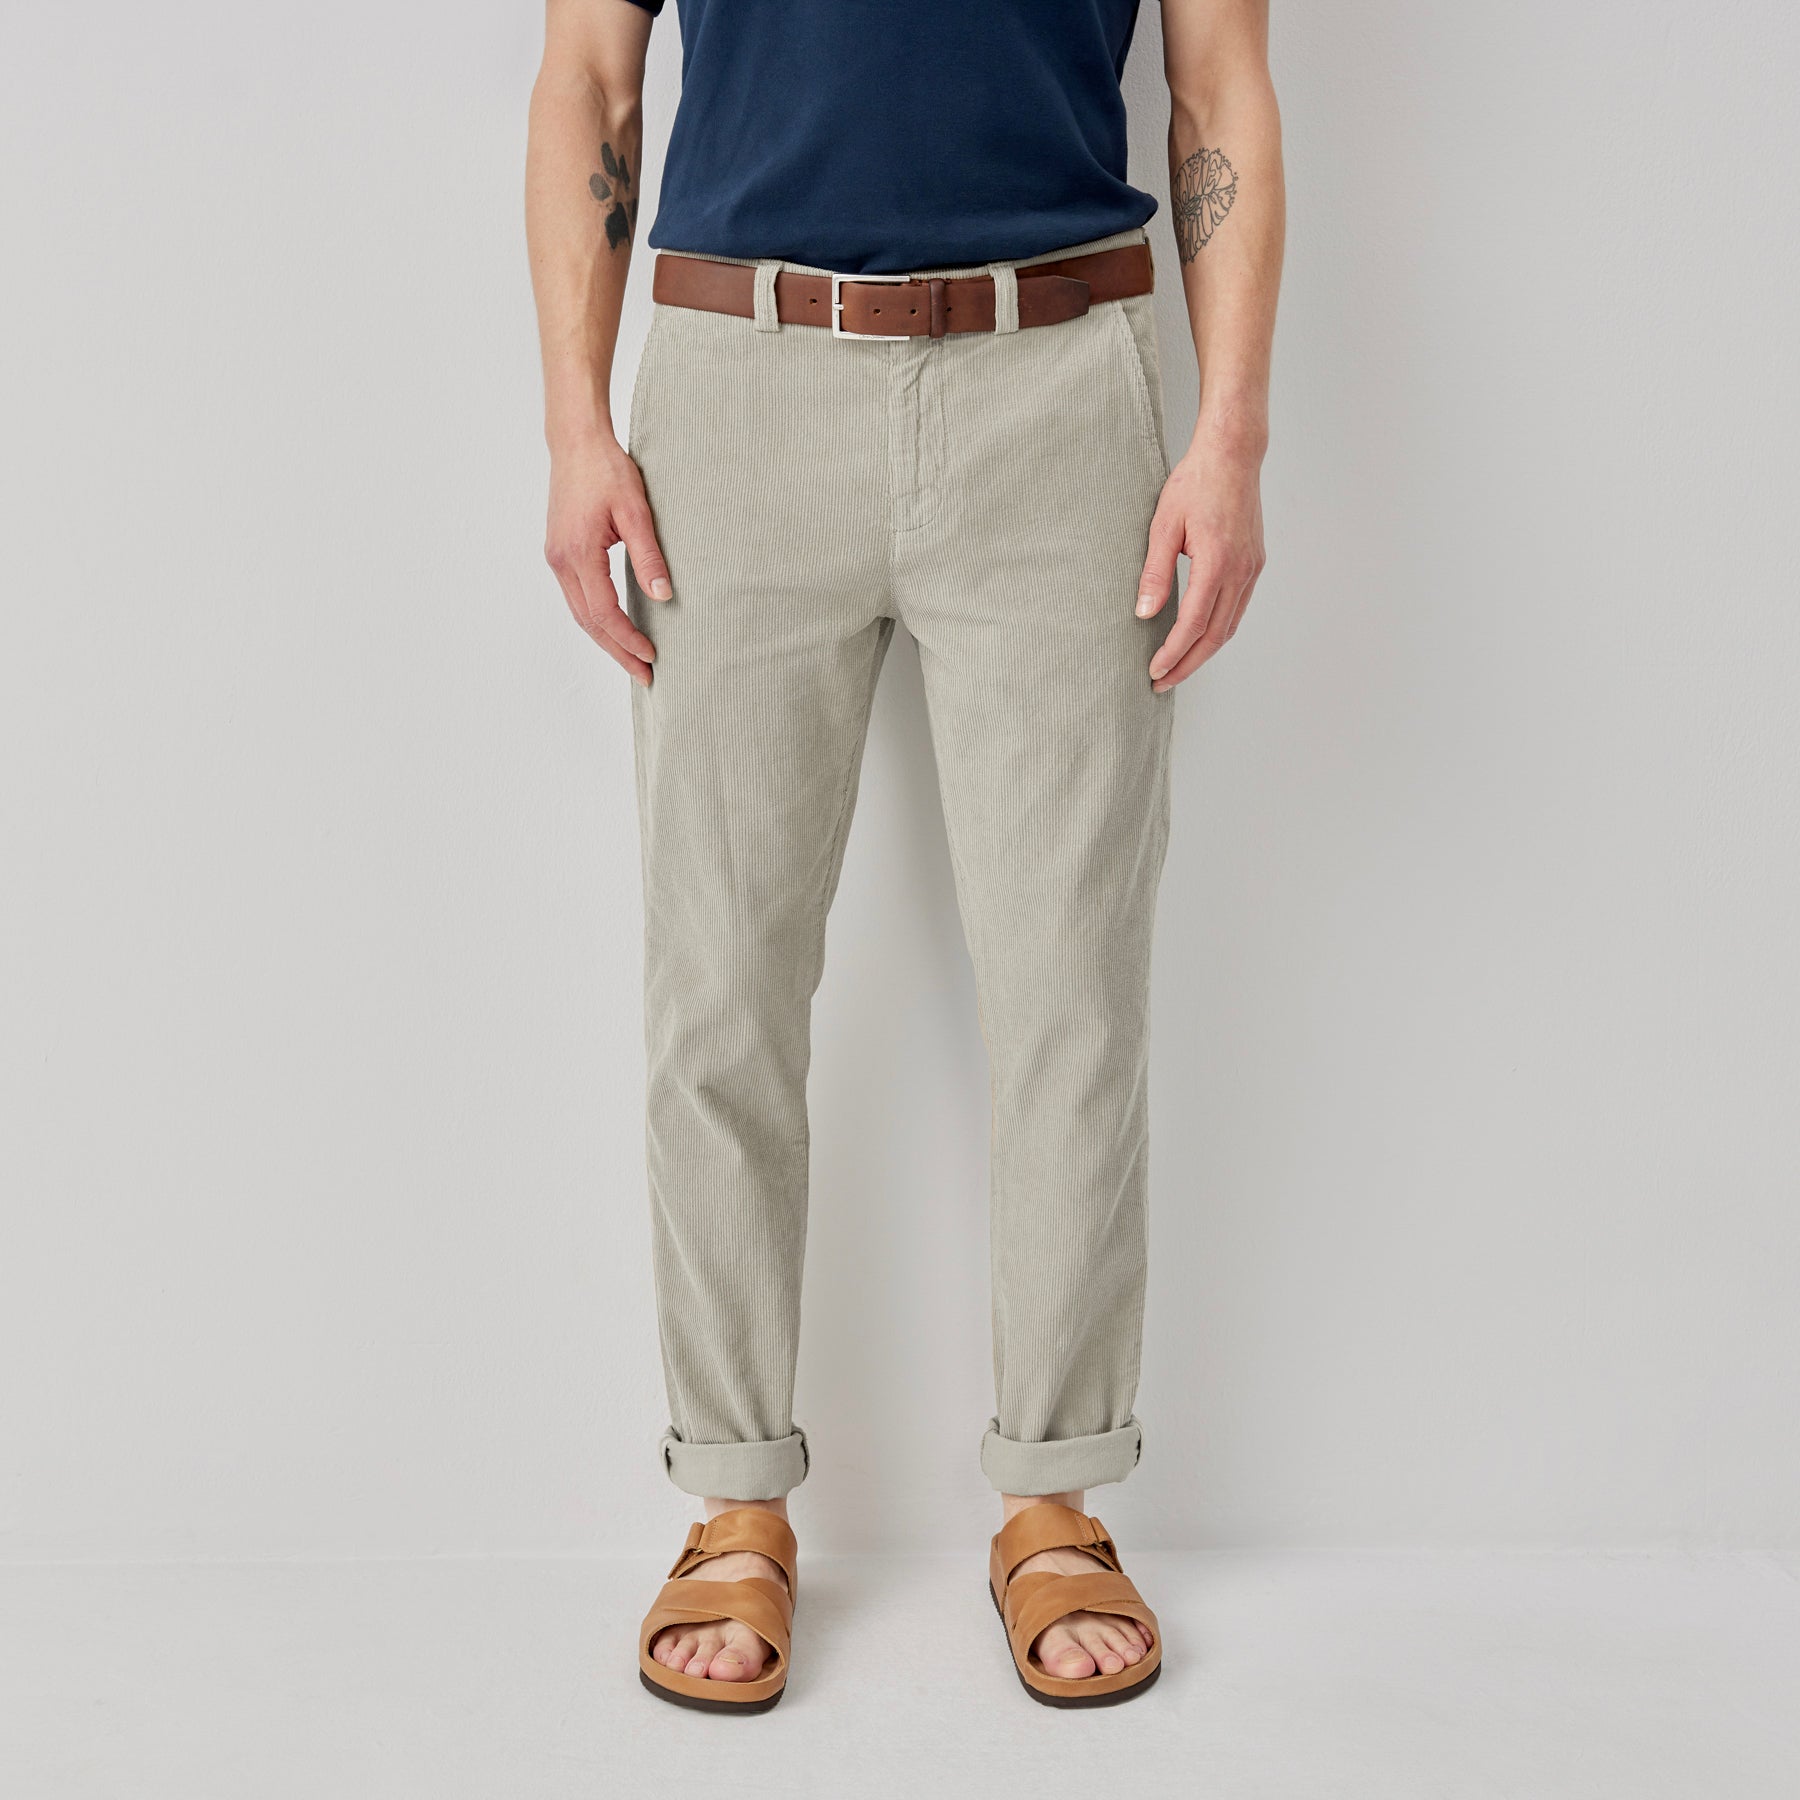 Buy Ben Sherman Stone Wash Chinos for Men Online | The Collective